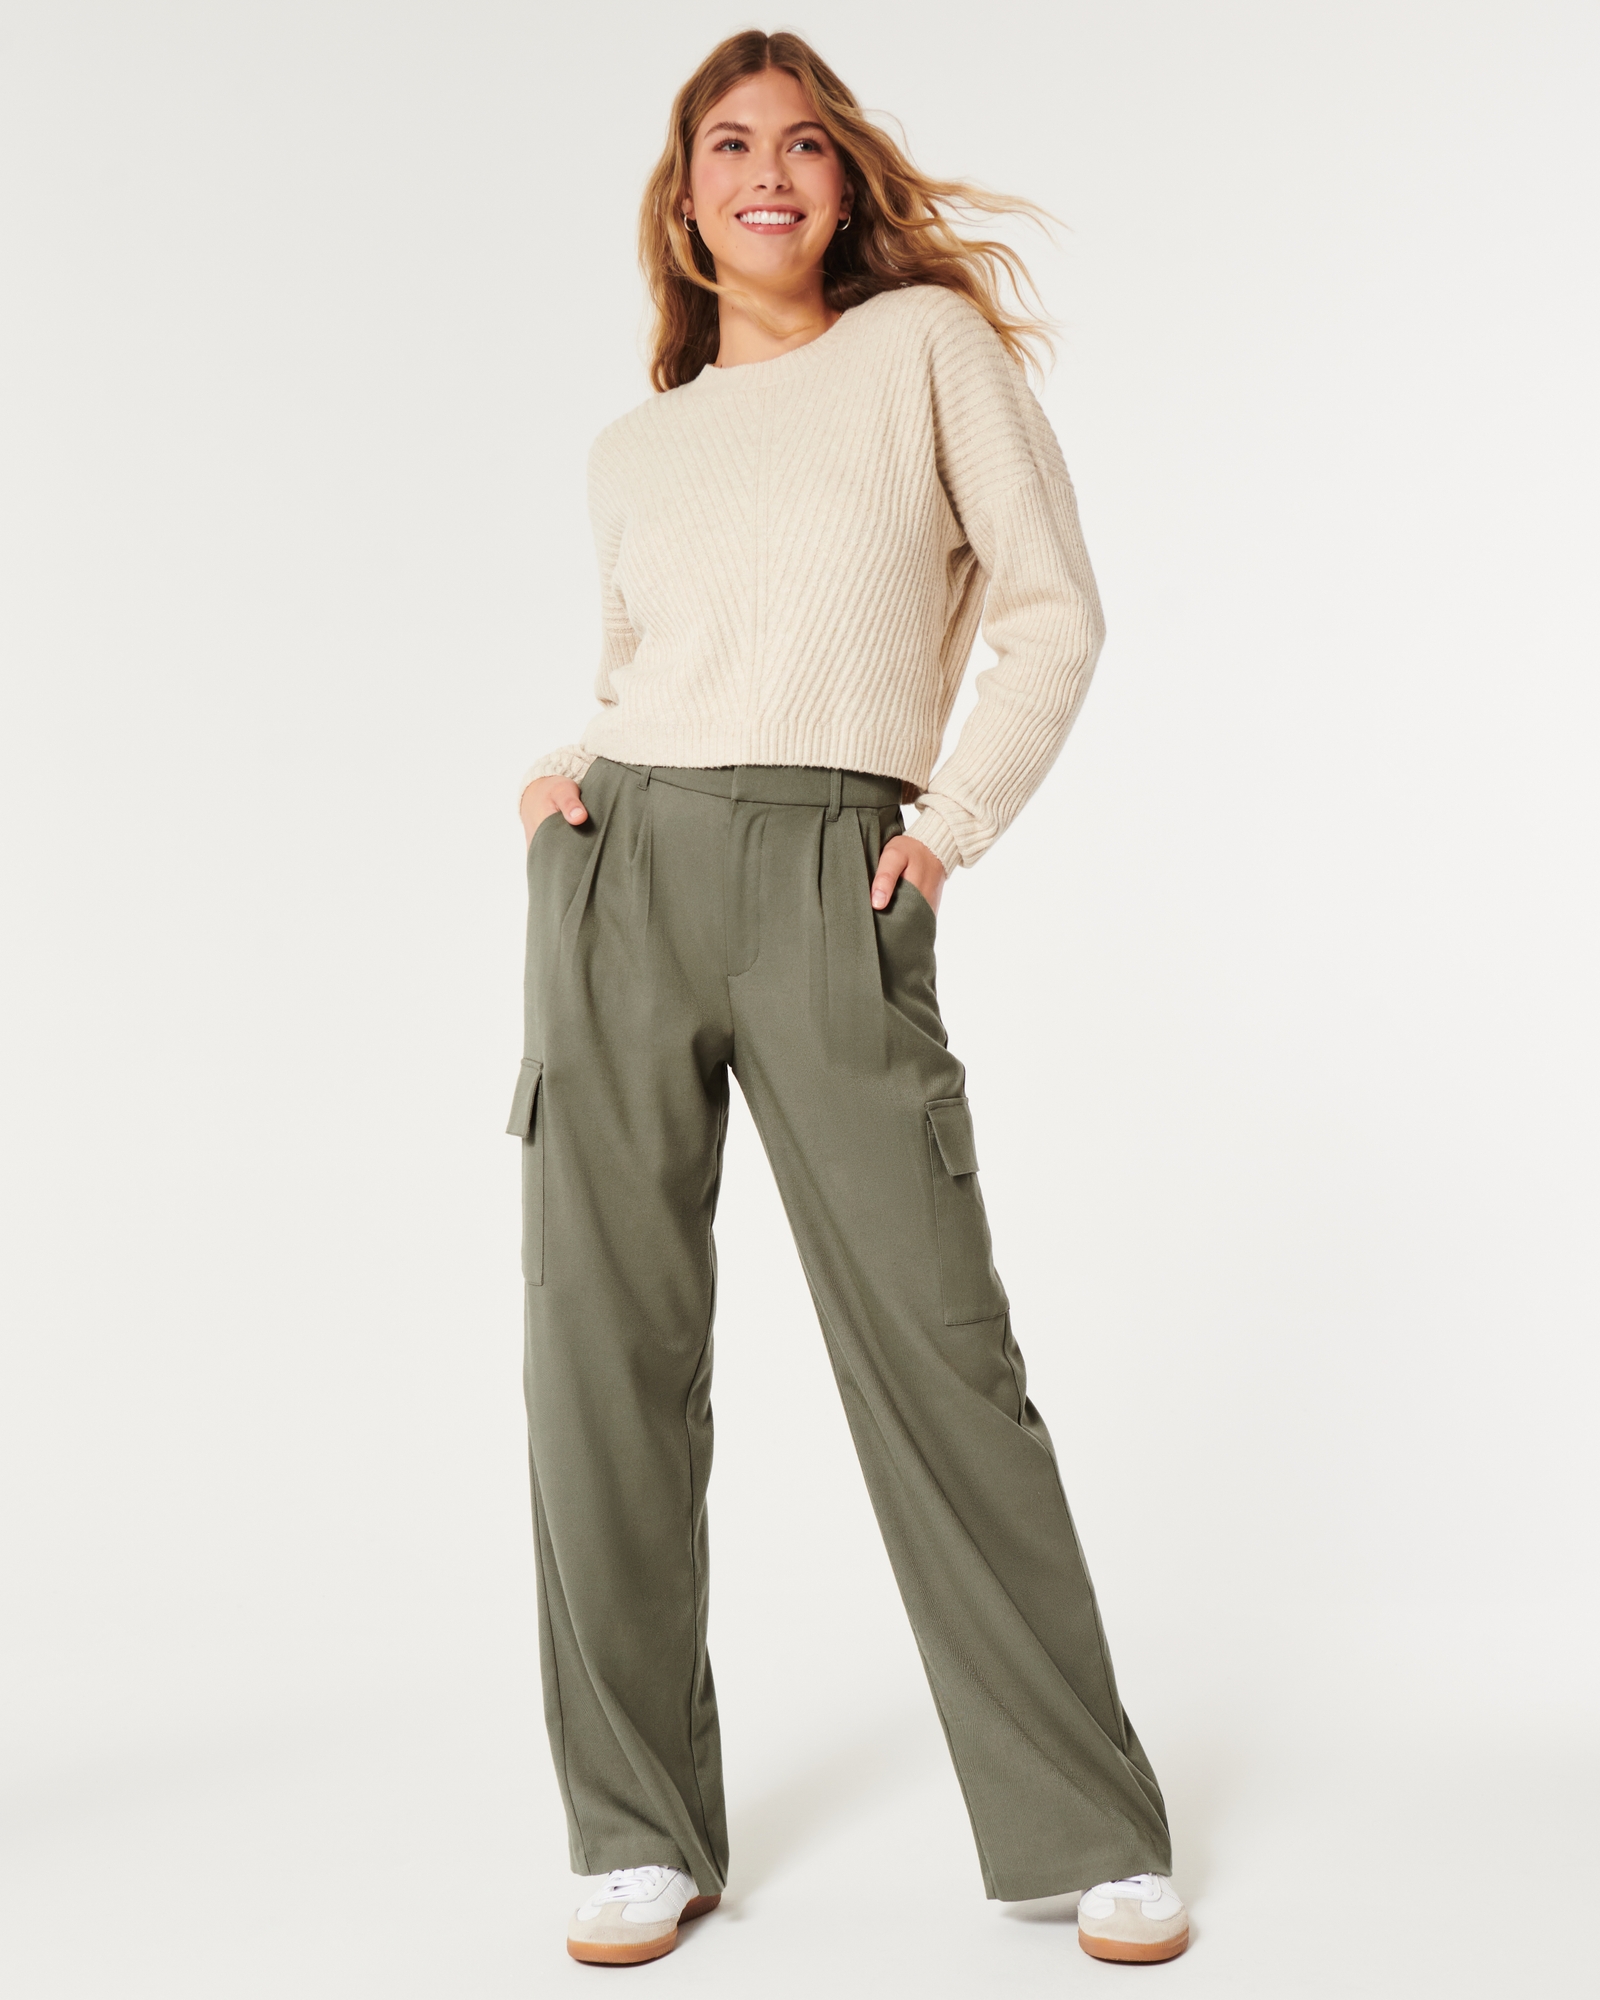 Hollister Co. Casual Lounge Pants for Women